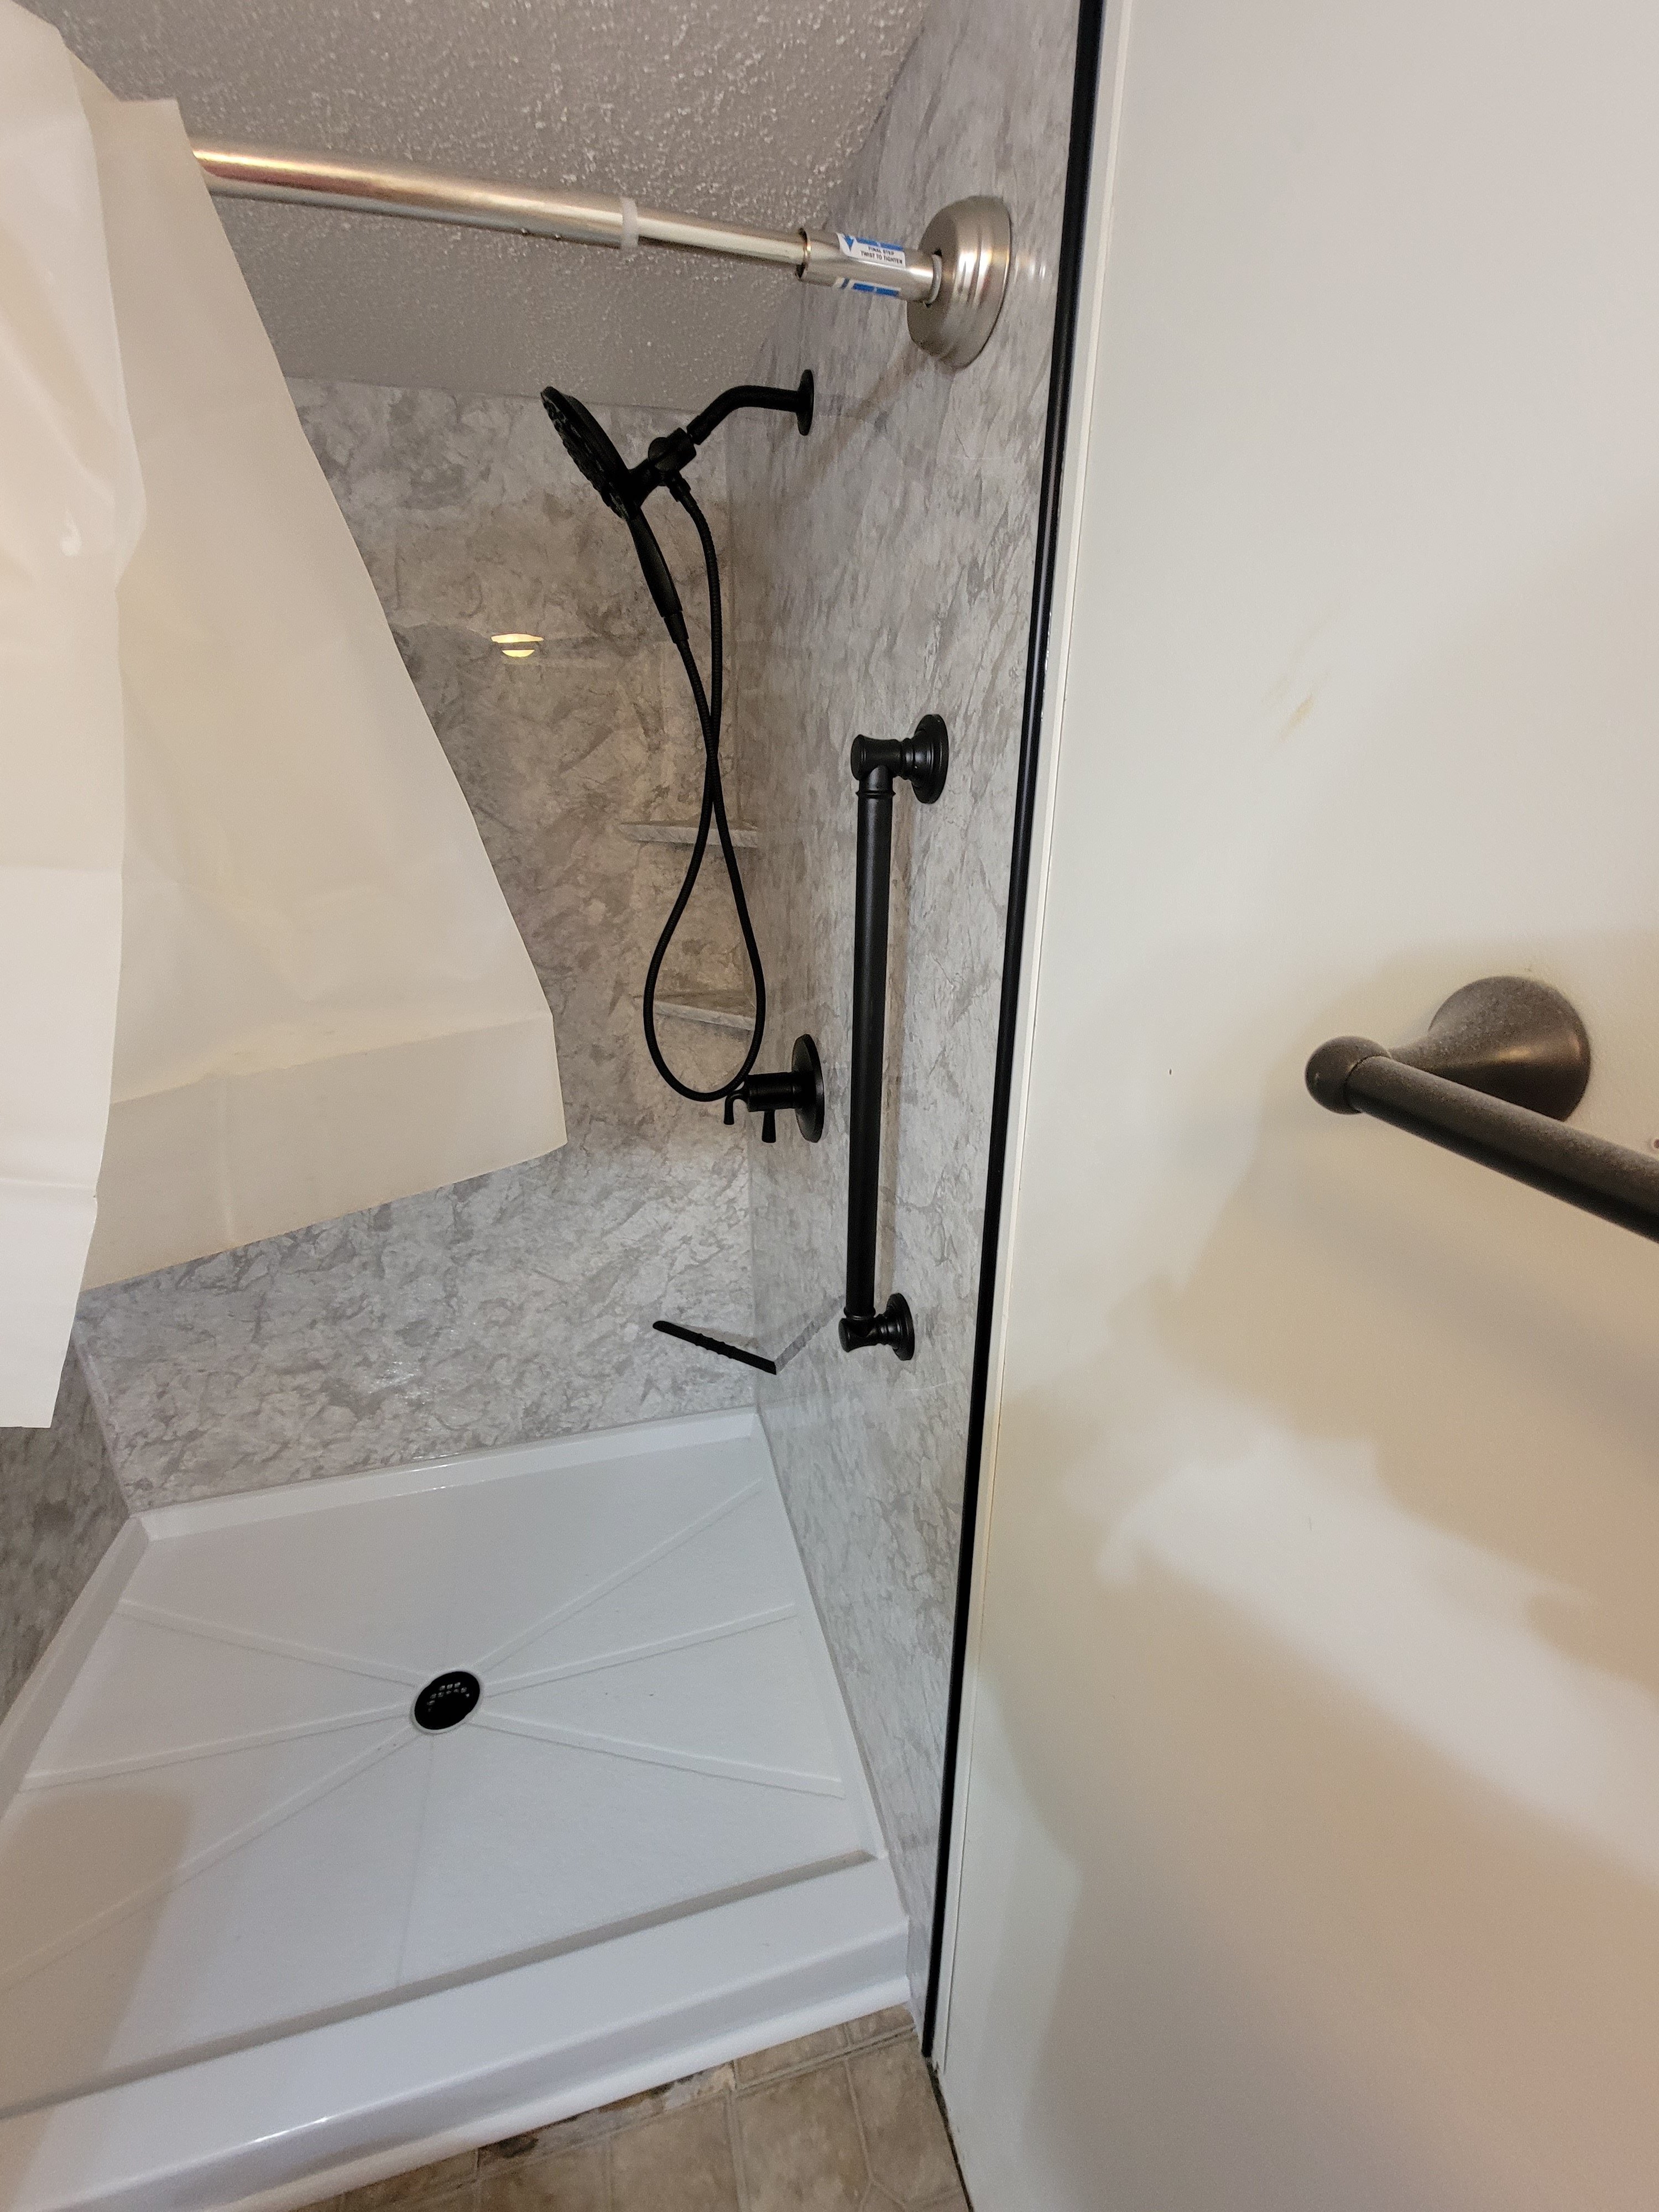 Completed walk-in shower